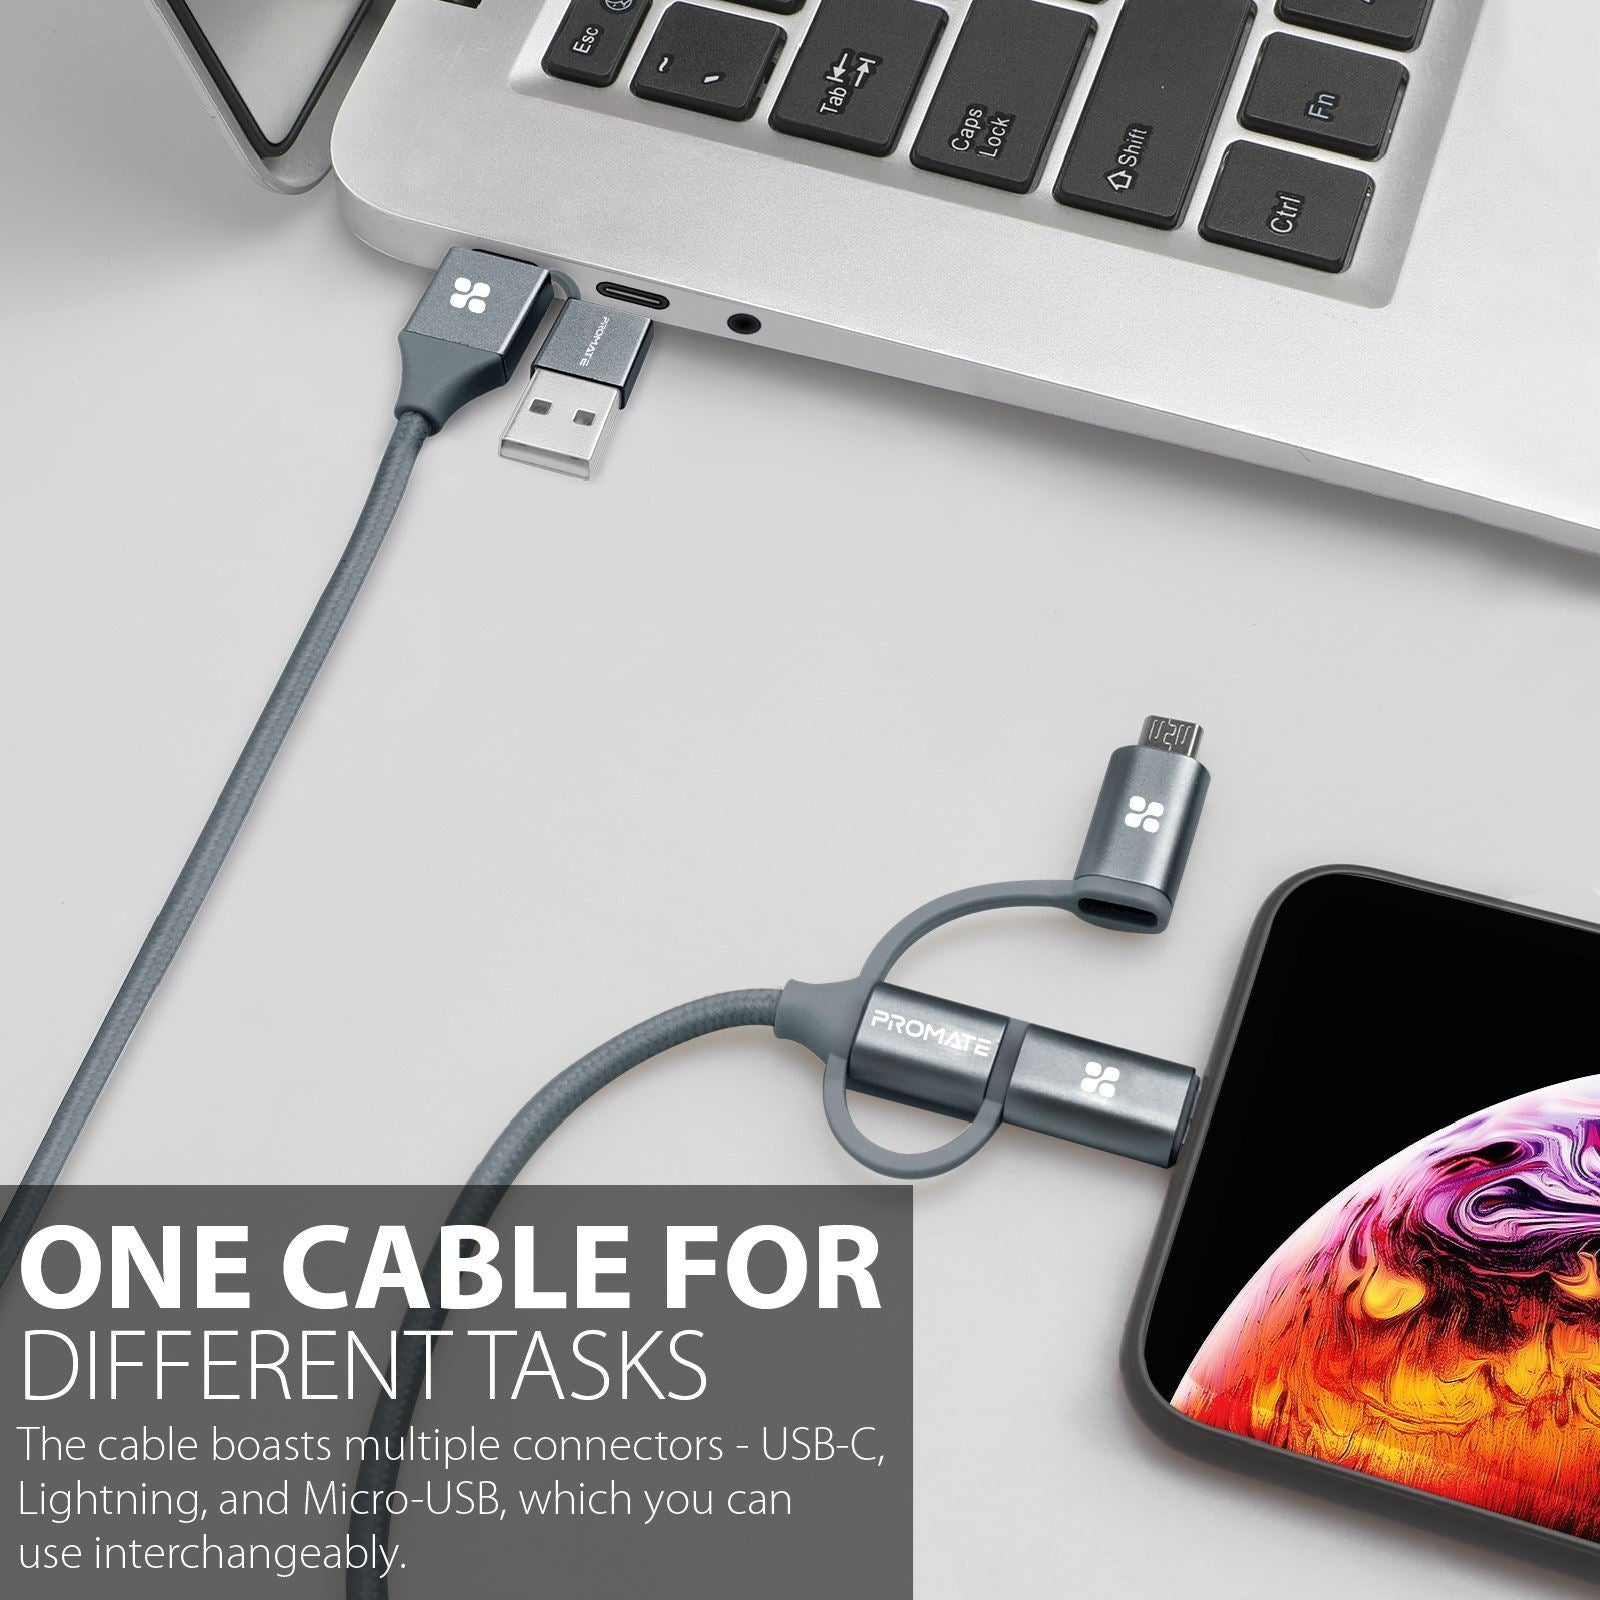 PROMATE_6-in1_Hybrid_1.2m_Multi-Connector_Cable_for_Charging_&_Data_Transfer._60W_Power_Delivery_USB-C_to_USB-C,_Micro-USB,_USB-C_Lightning_Connector._Grey_Colour. 1566